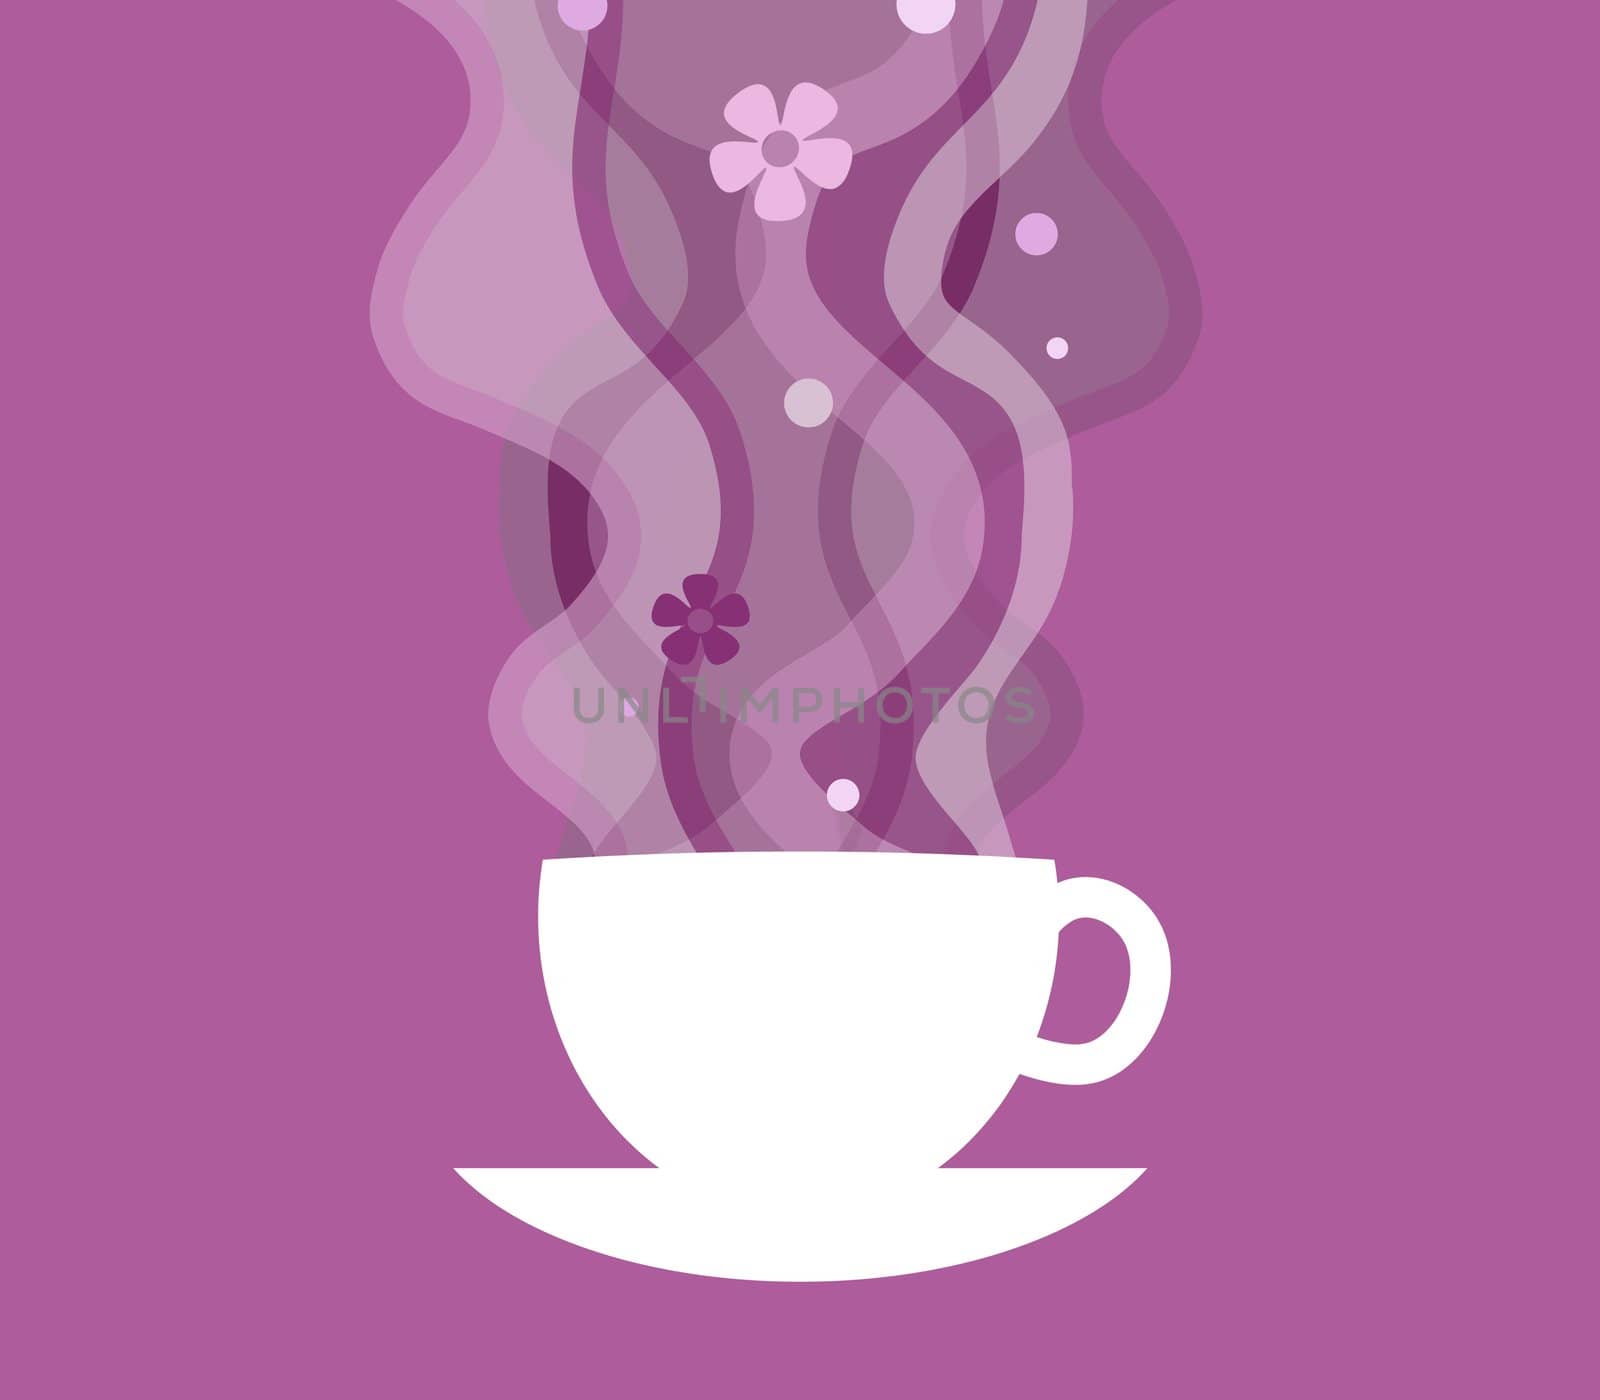 Illustration of a cup and saucer with aromatic flowery steam